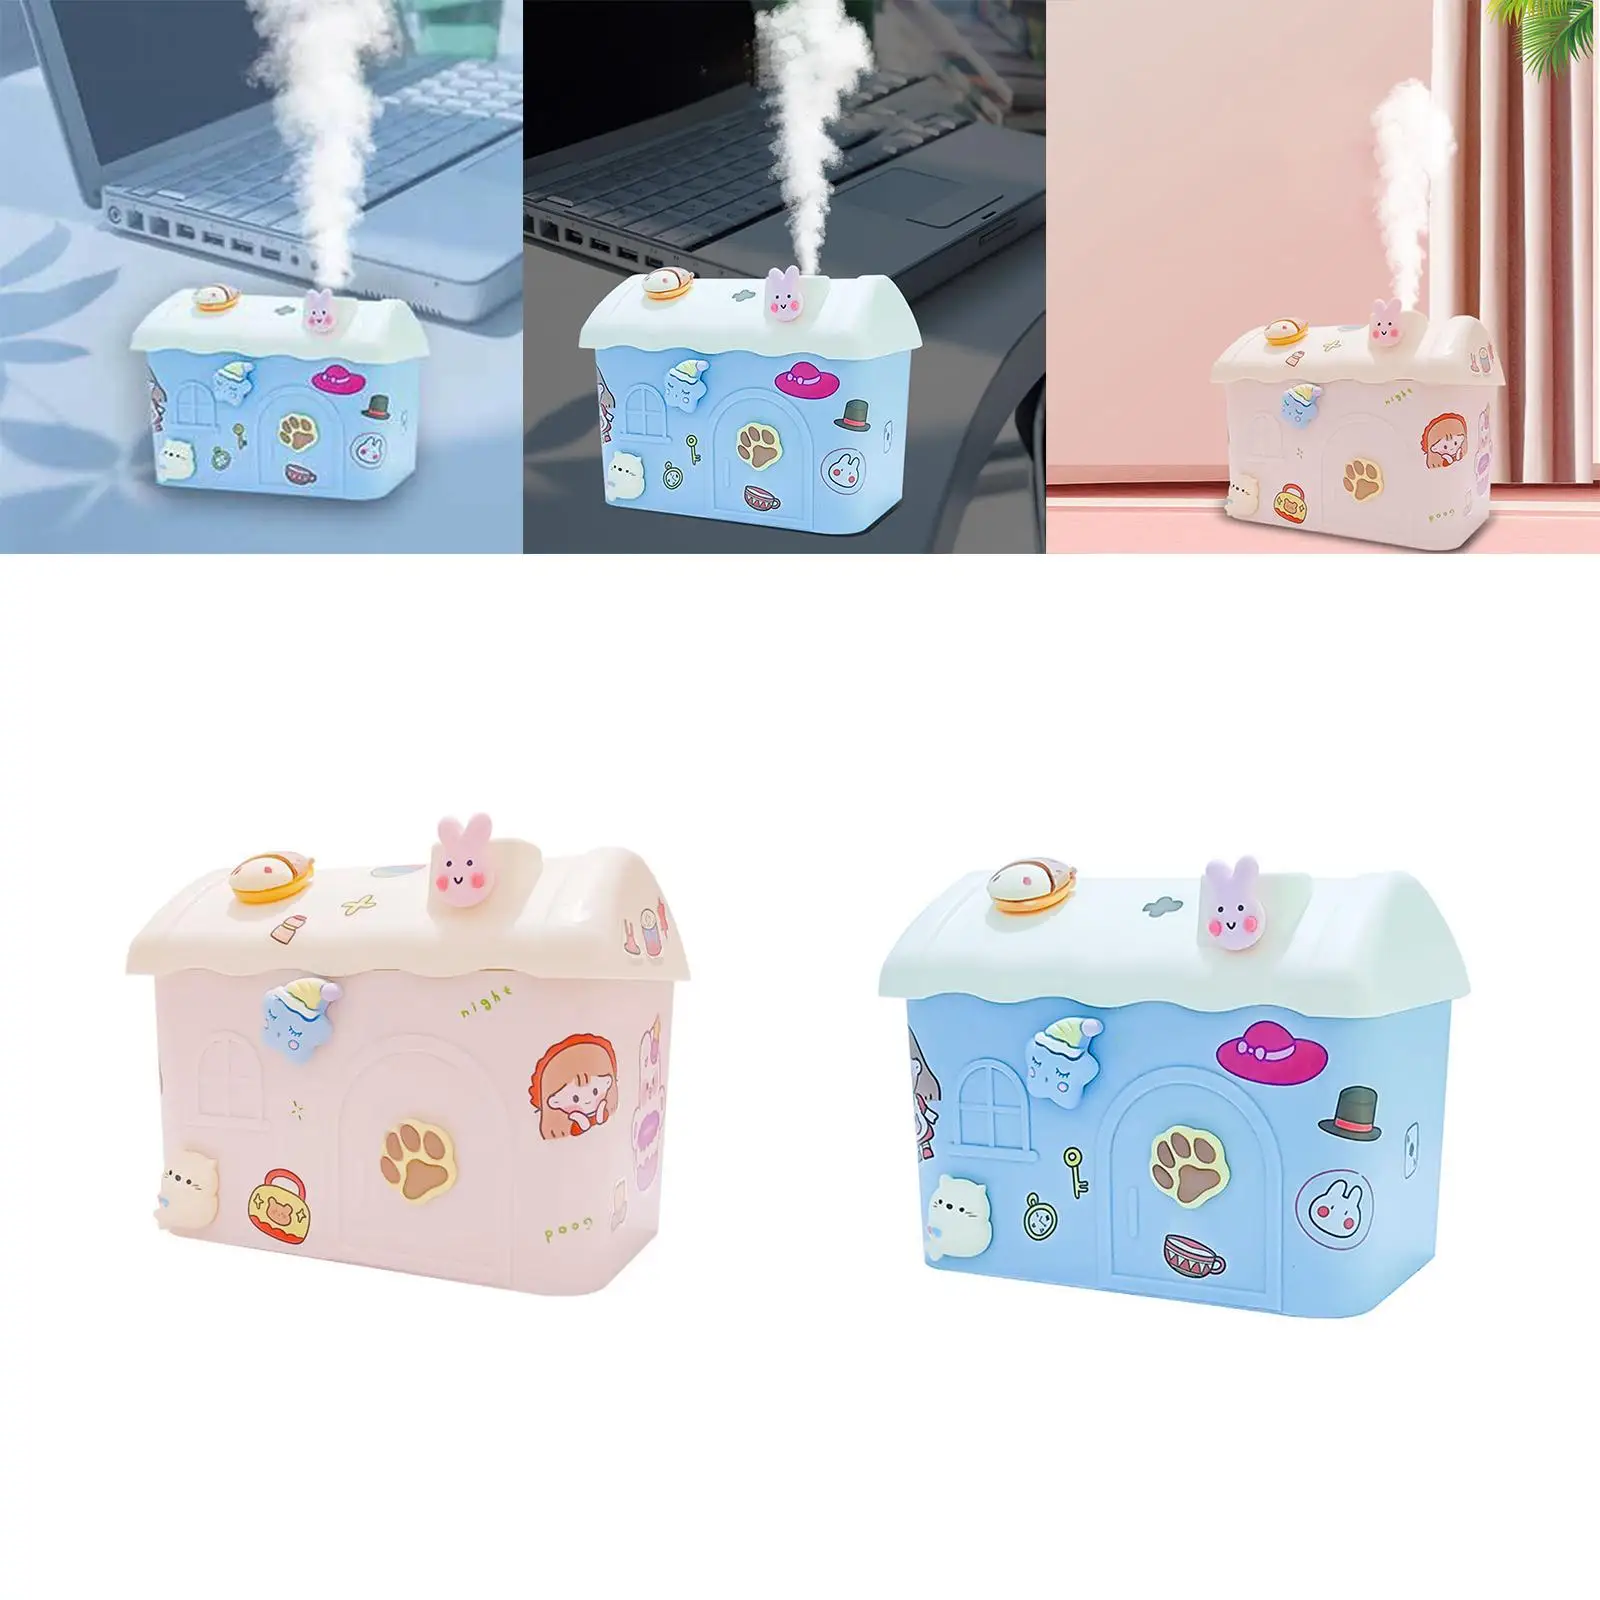 DIY Essential diffuser Diffuser Operation USB Charging Portable Cool Mist Humidifier for Nursery Dorm Office Car